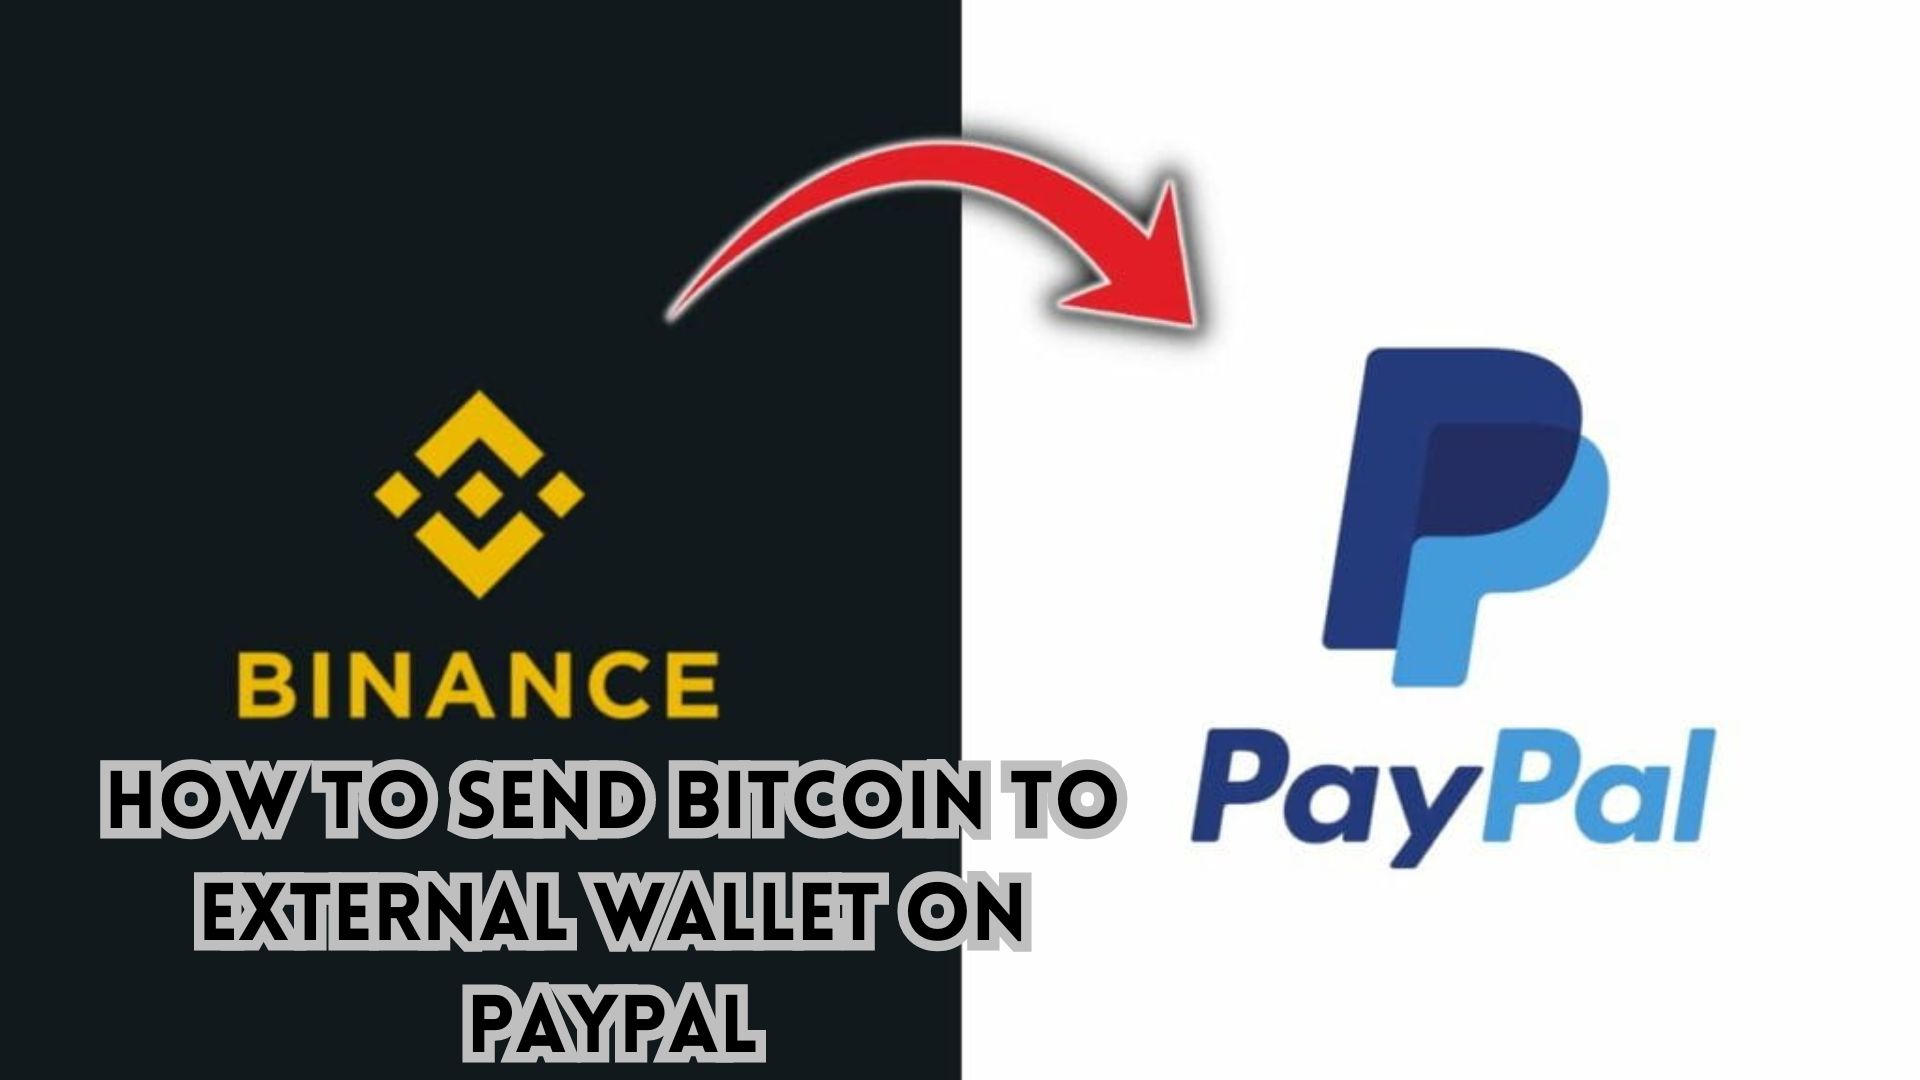 How To Send Bitcoin To External Wallet on Paypal.